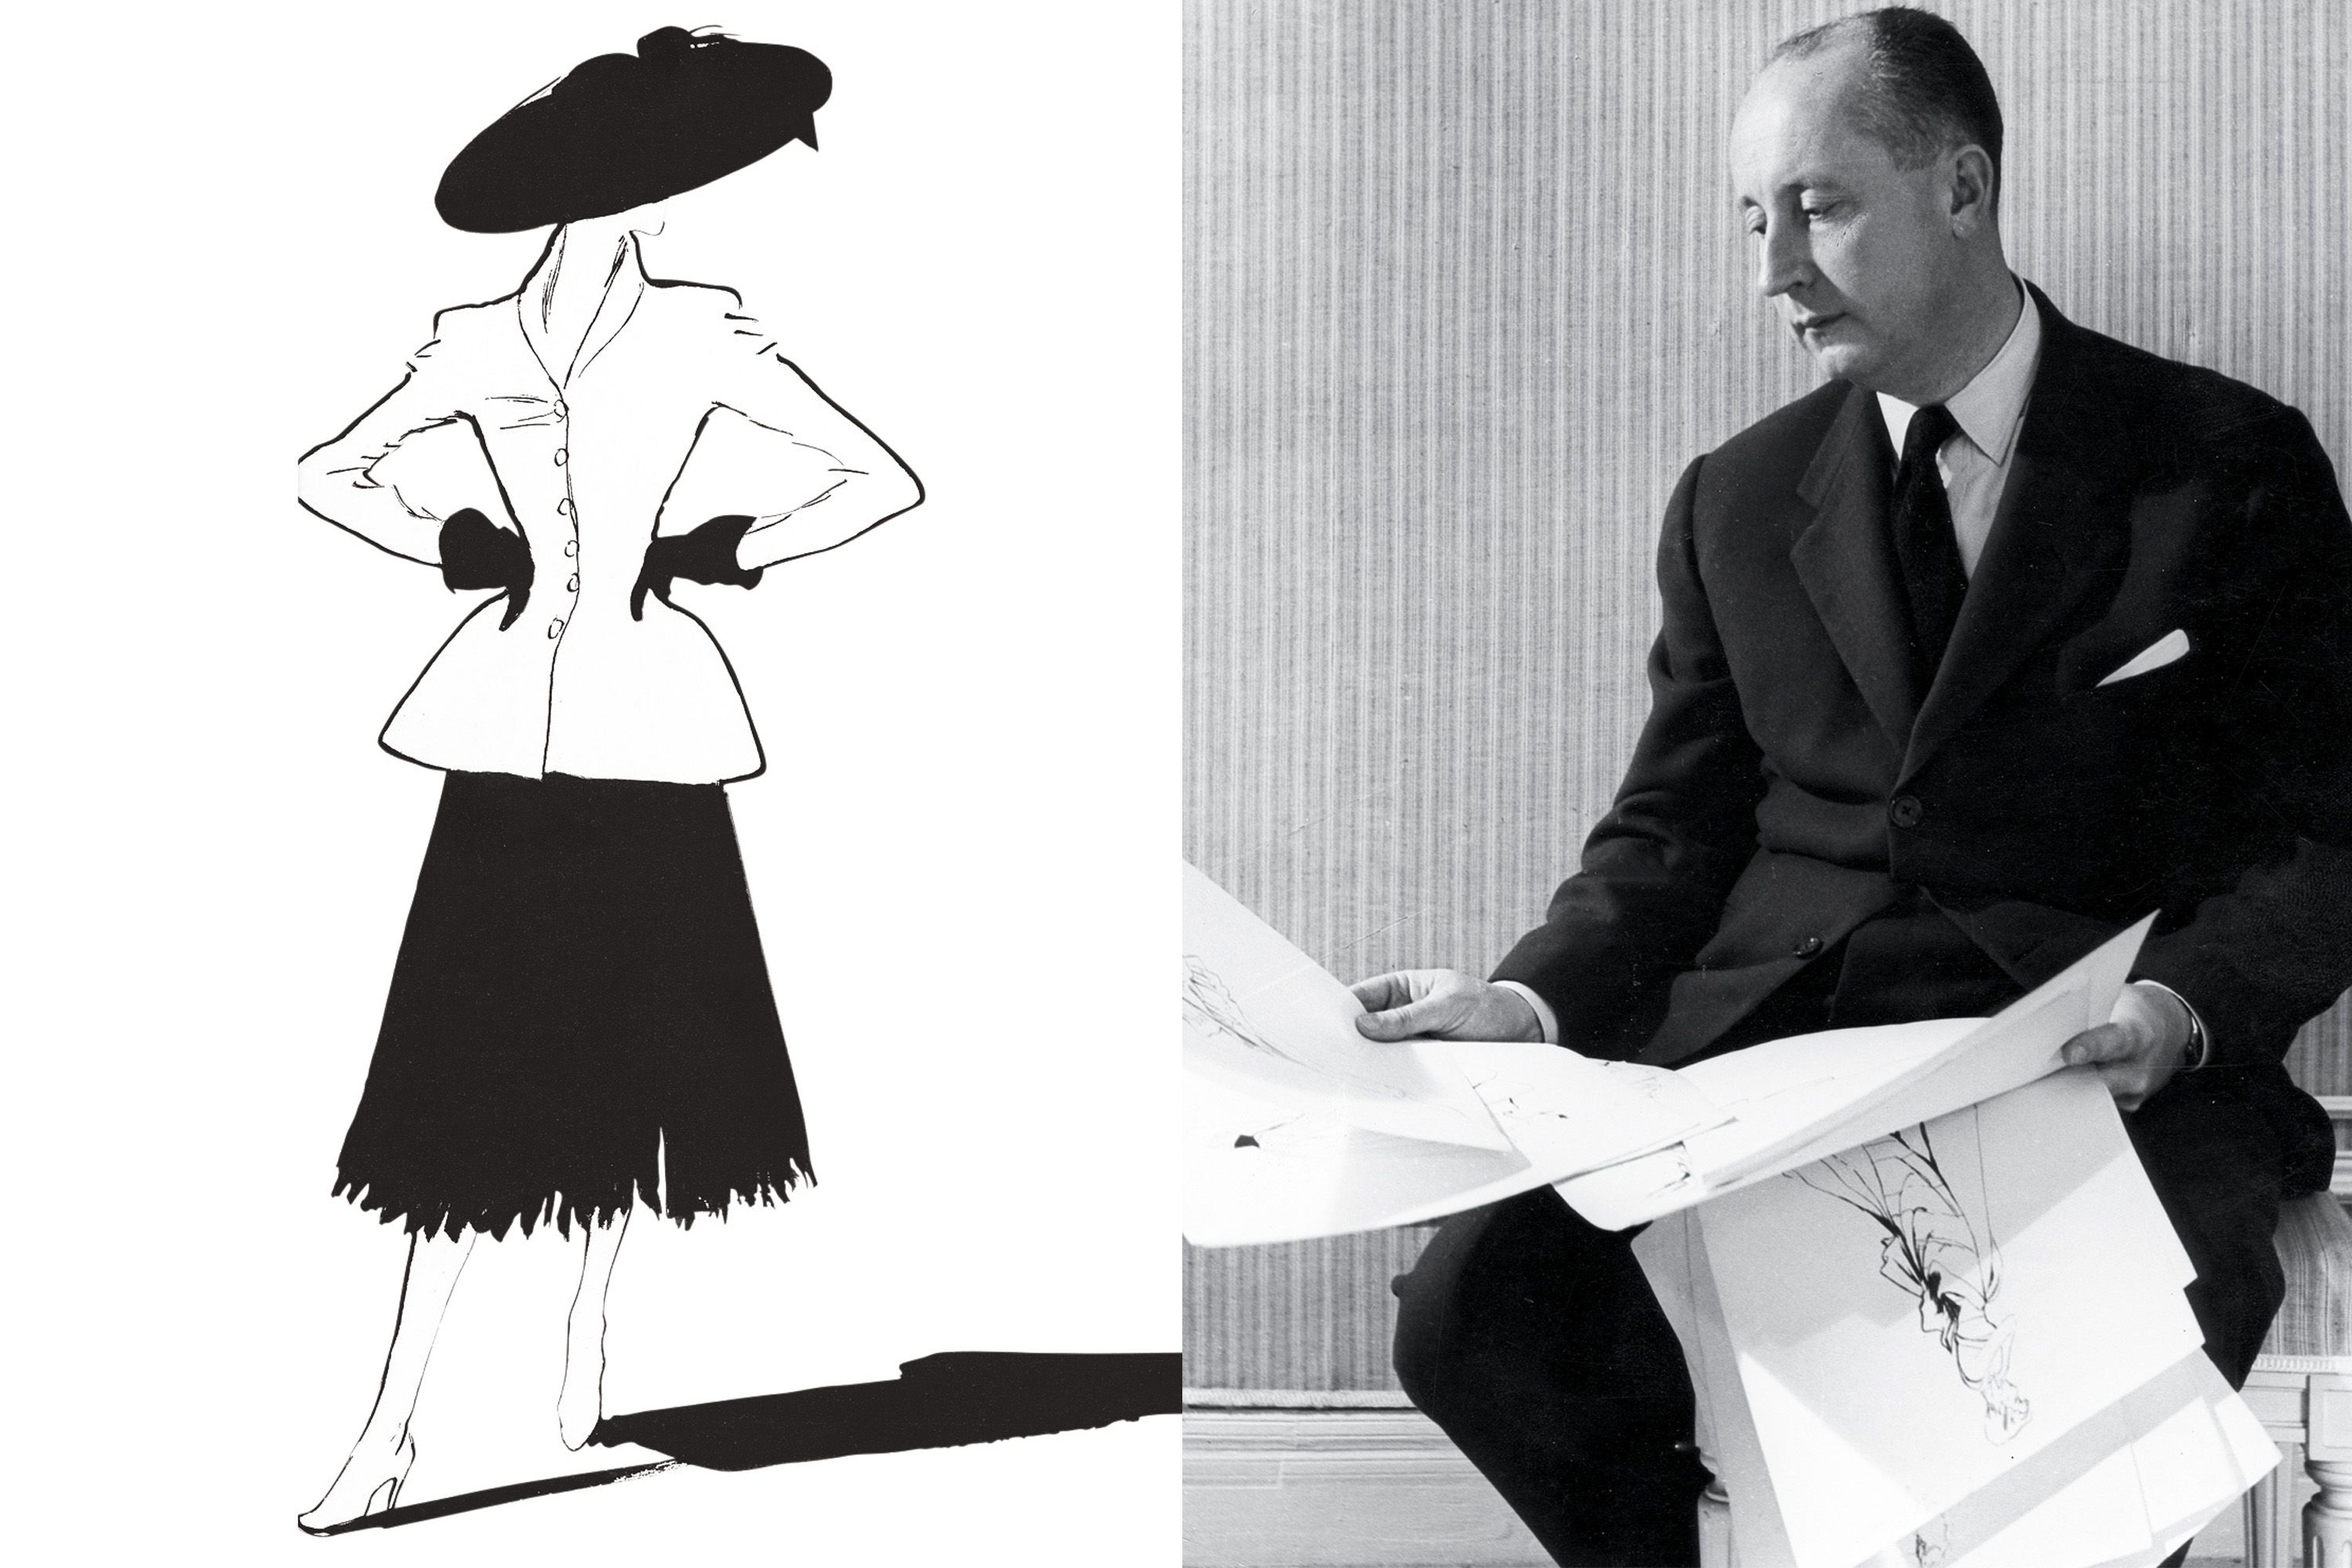 Christian Dior's New Look, introduced in February 1947. Courtesy of The